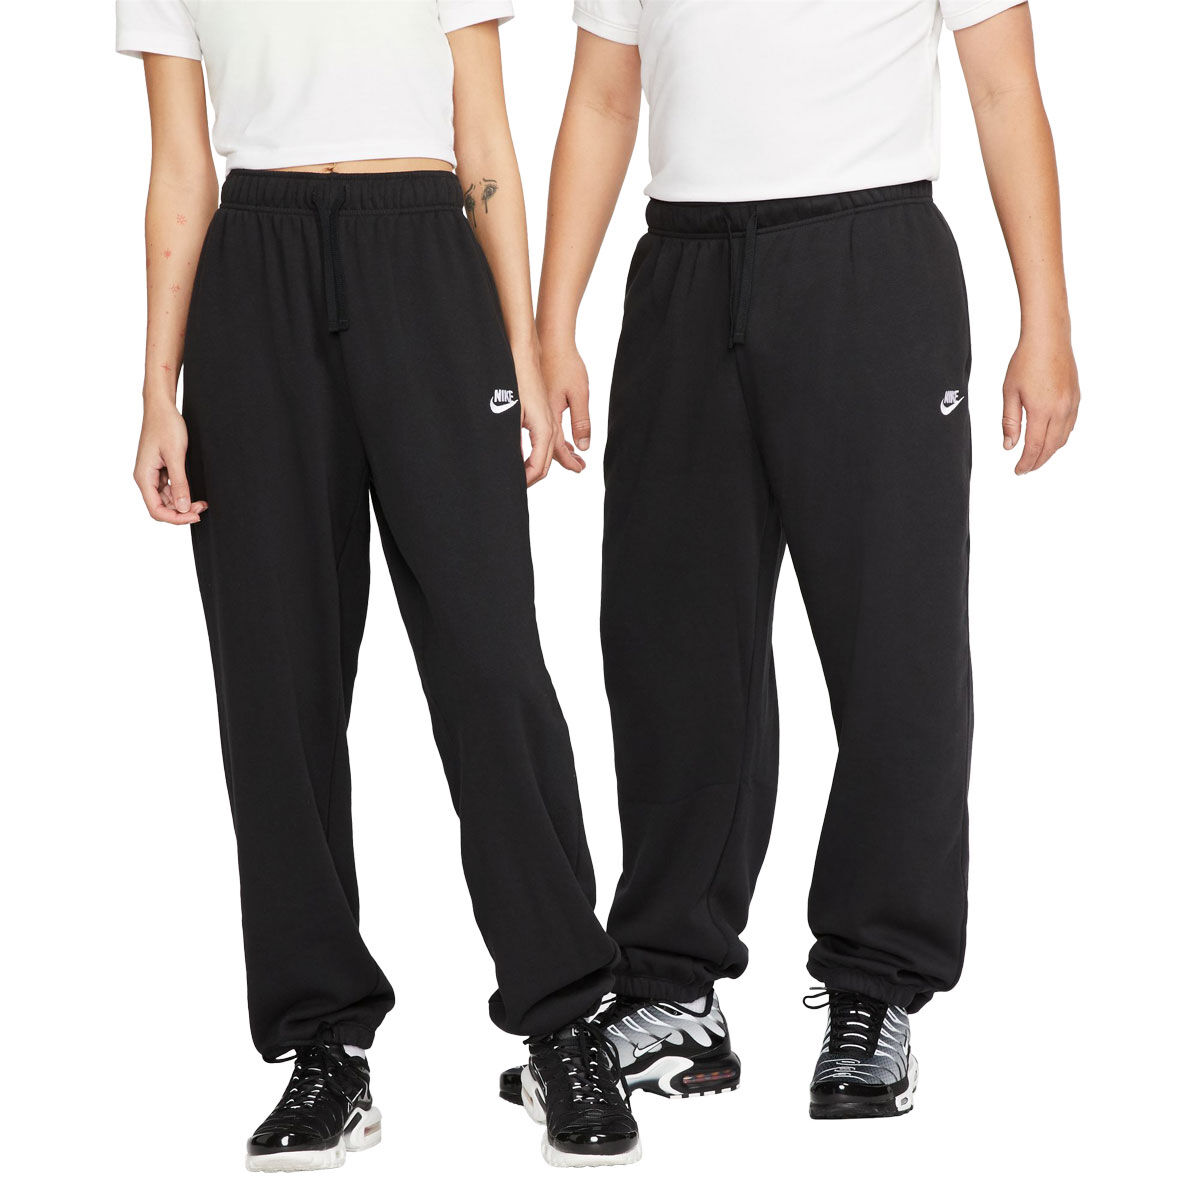 Buy Women Black Graphic Print Casual T-shirt and Track Pants Online -  801473 | Allen Solly